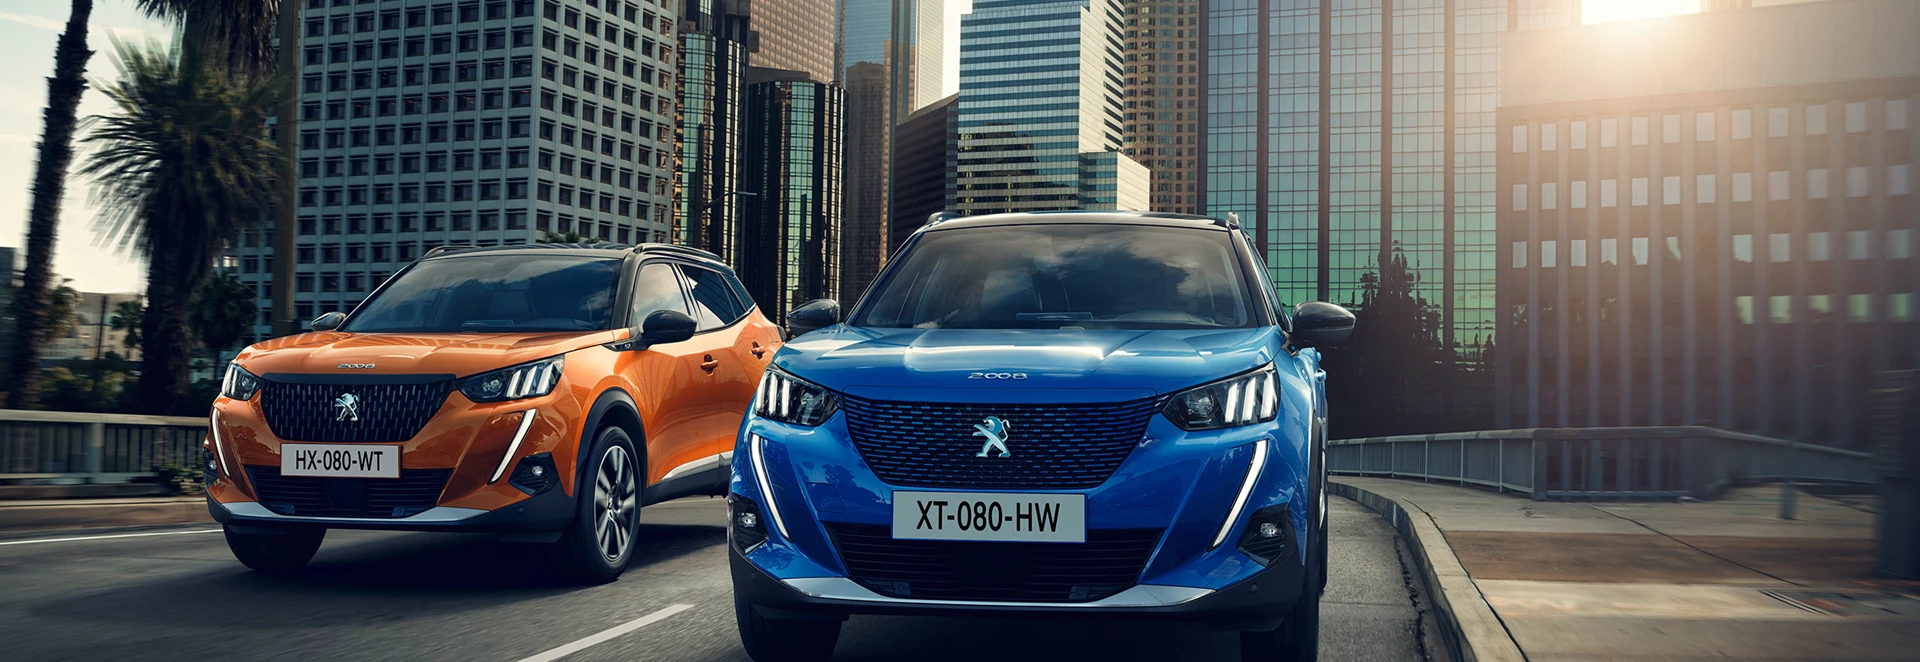 What’s new on the Peugeot 2008 and e-2008?